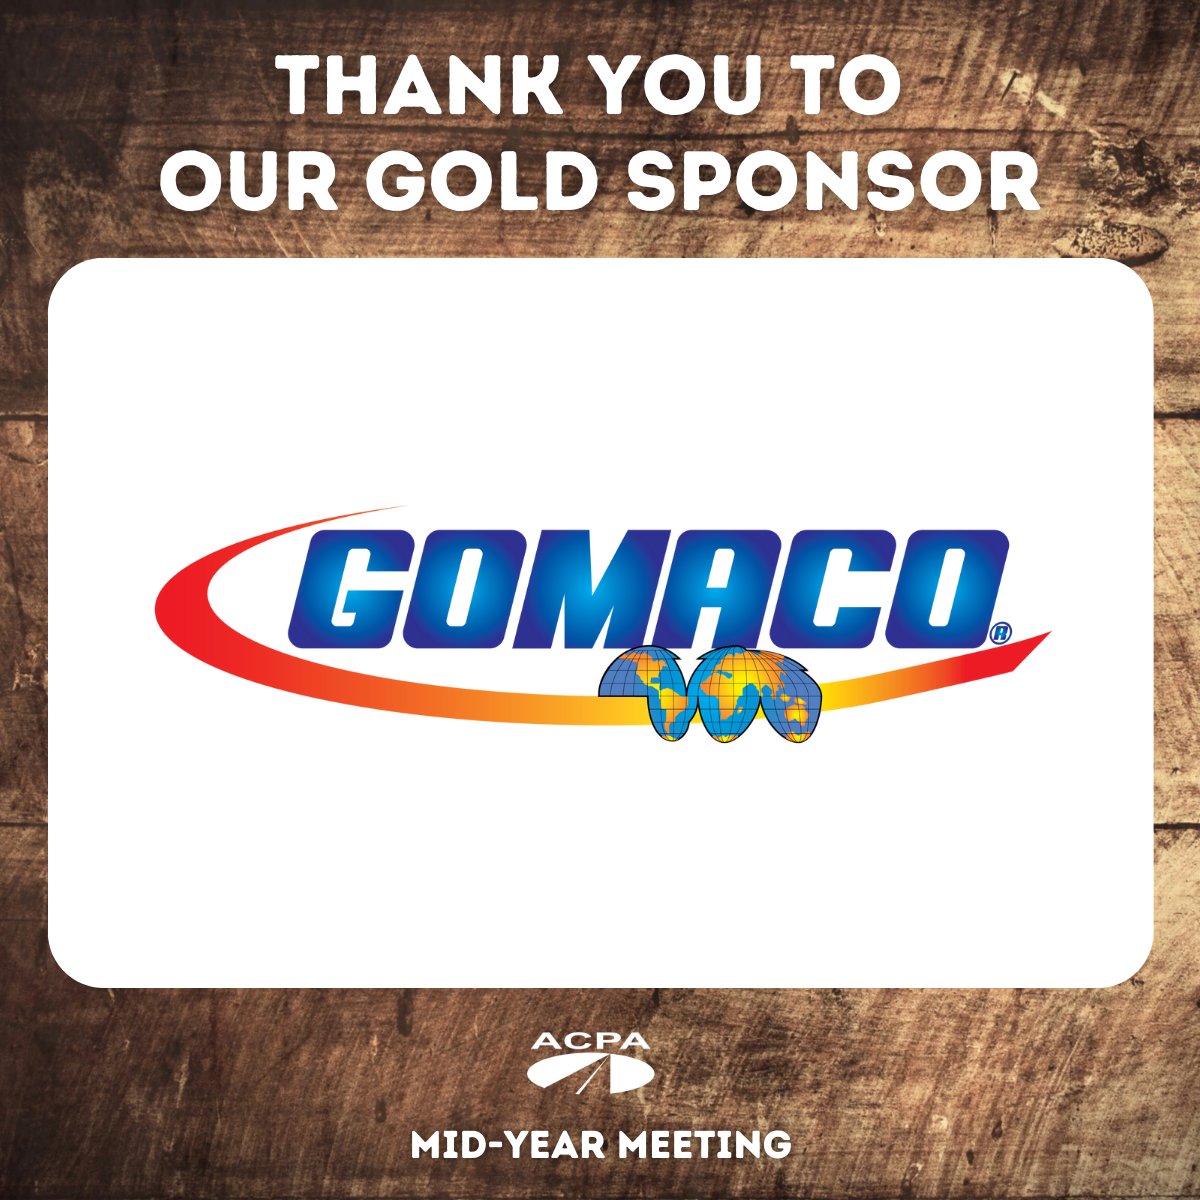 Thank you to GOMACO for being a 2023 Gold Program Sponsor for the Mid-Year Meeting! #ACPAMidYear #concretepavement